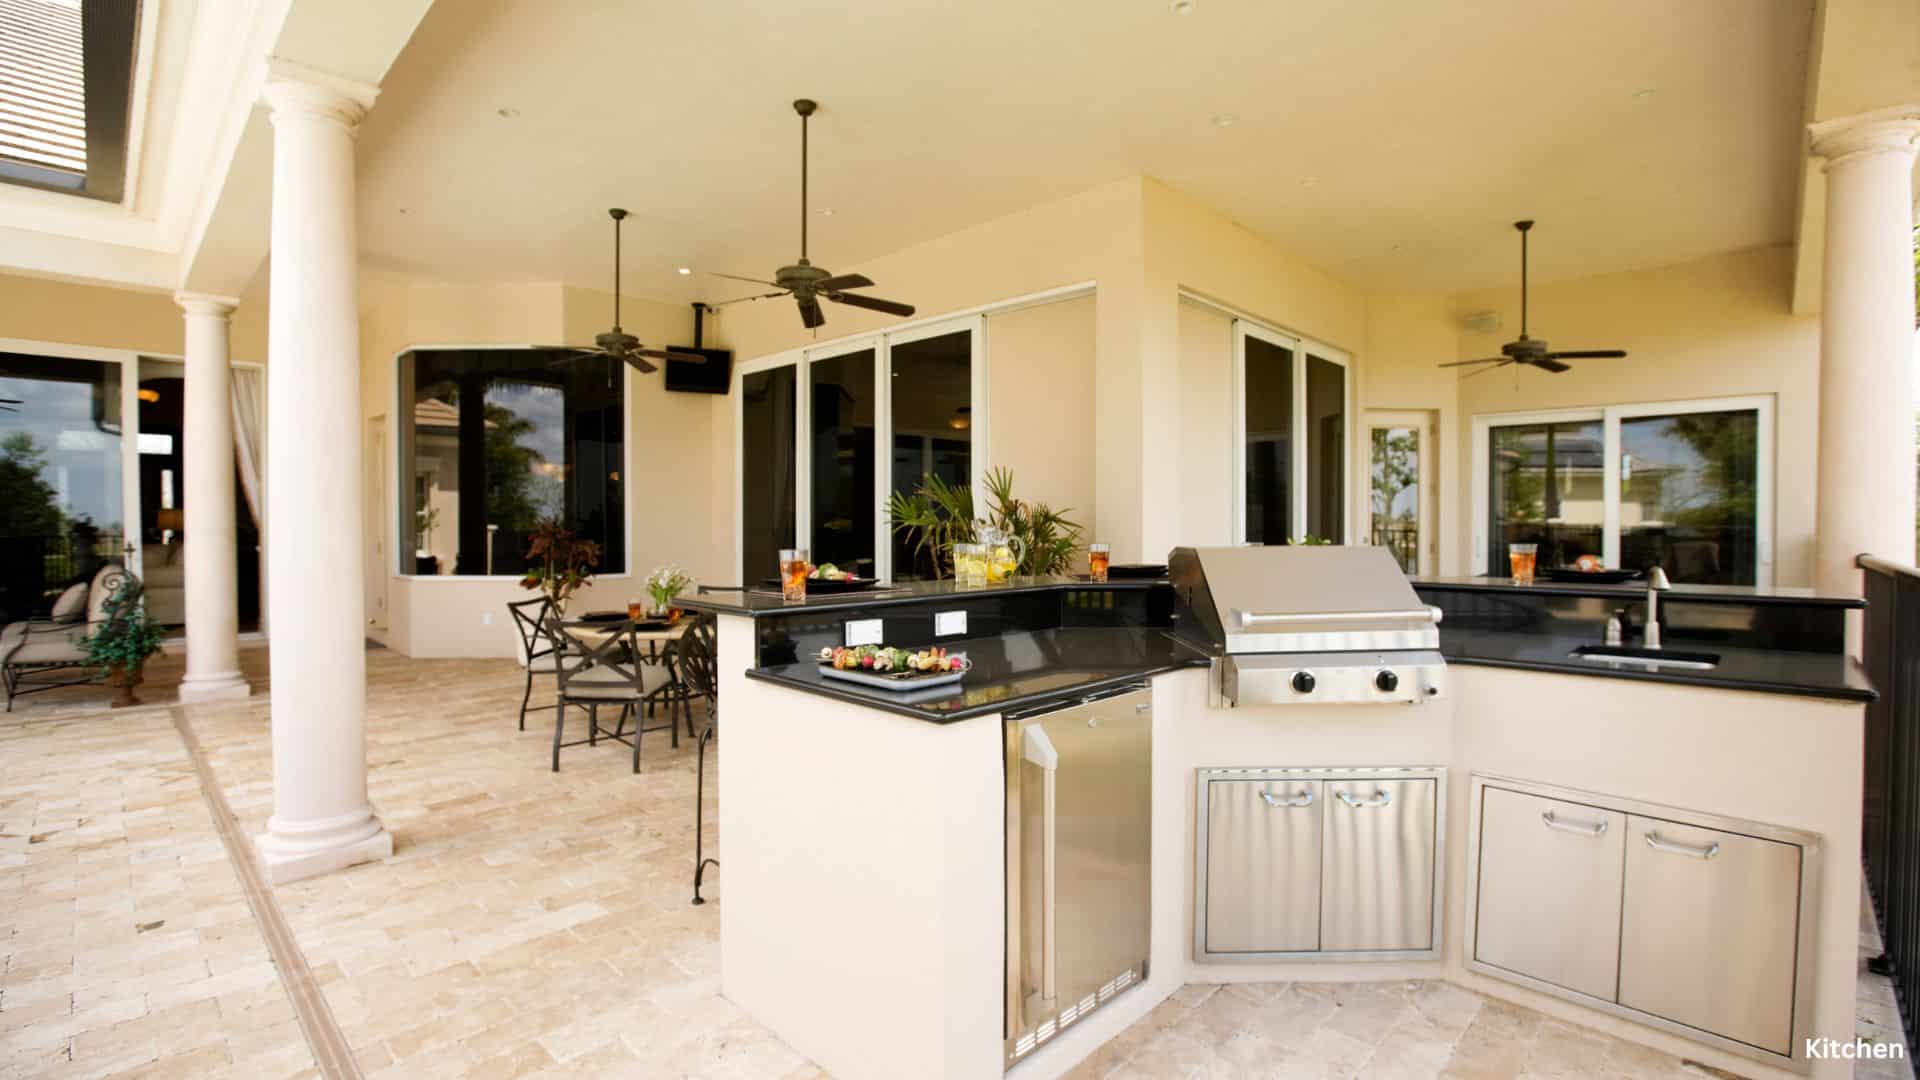 outdoor kitchen remodeling